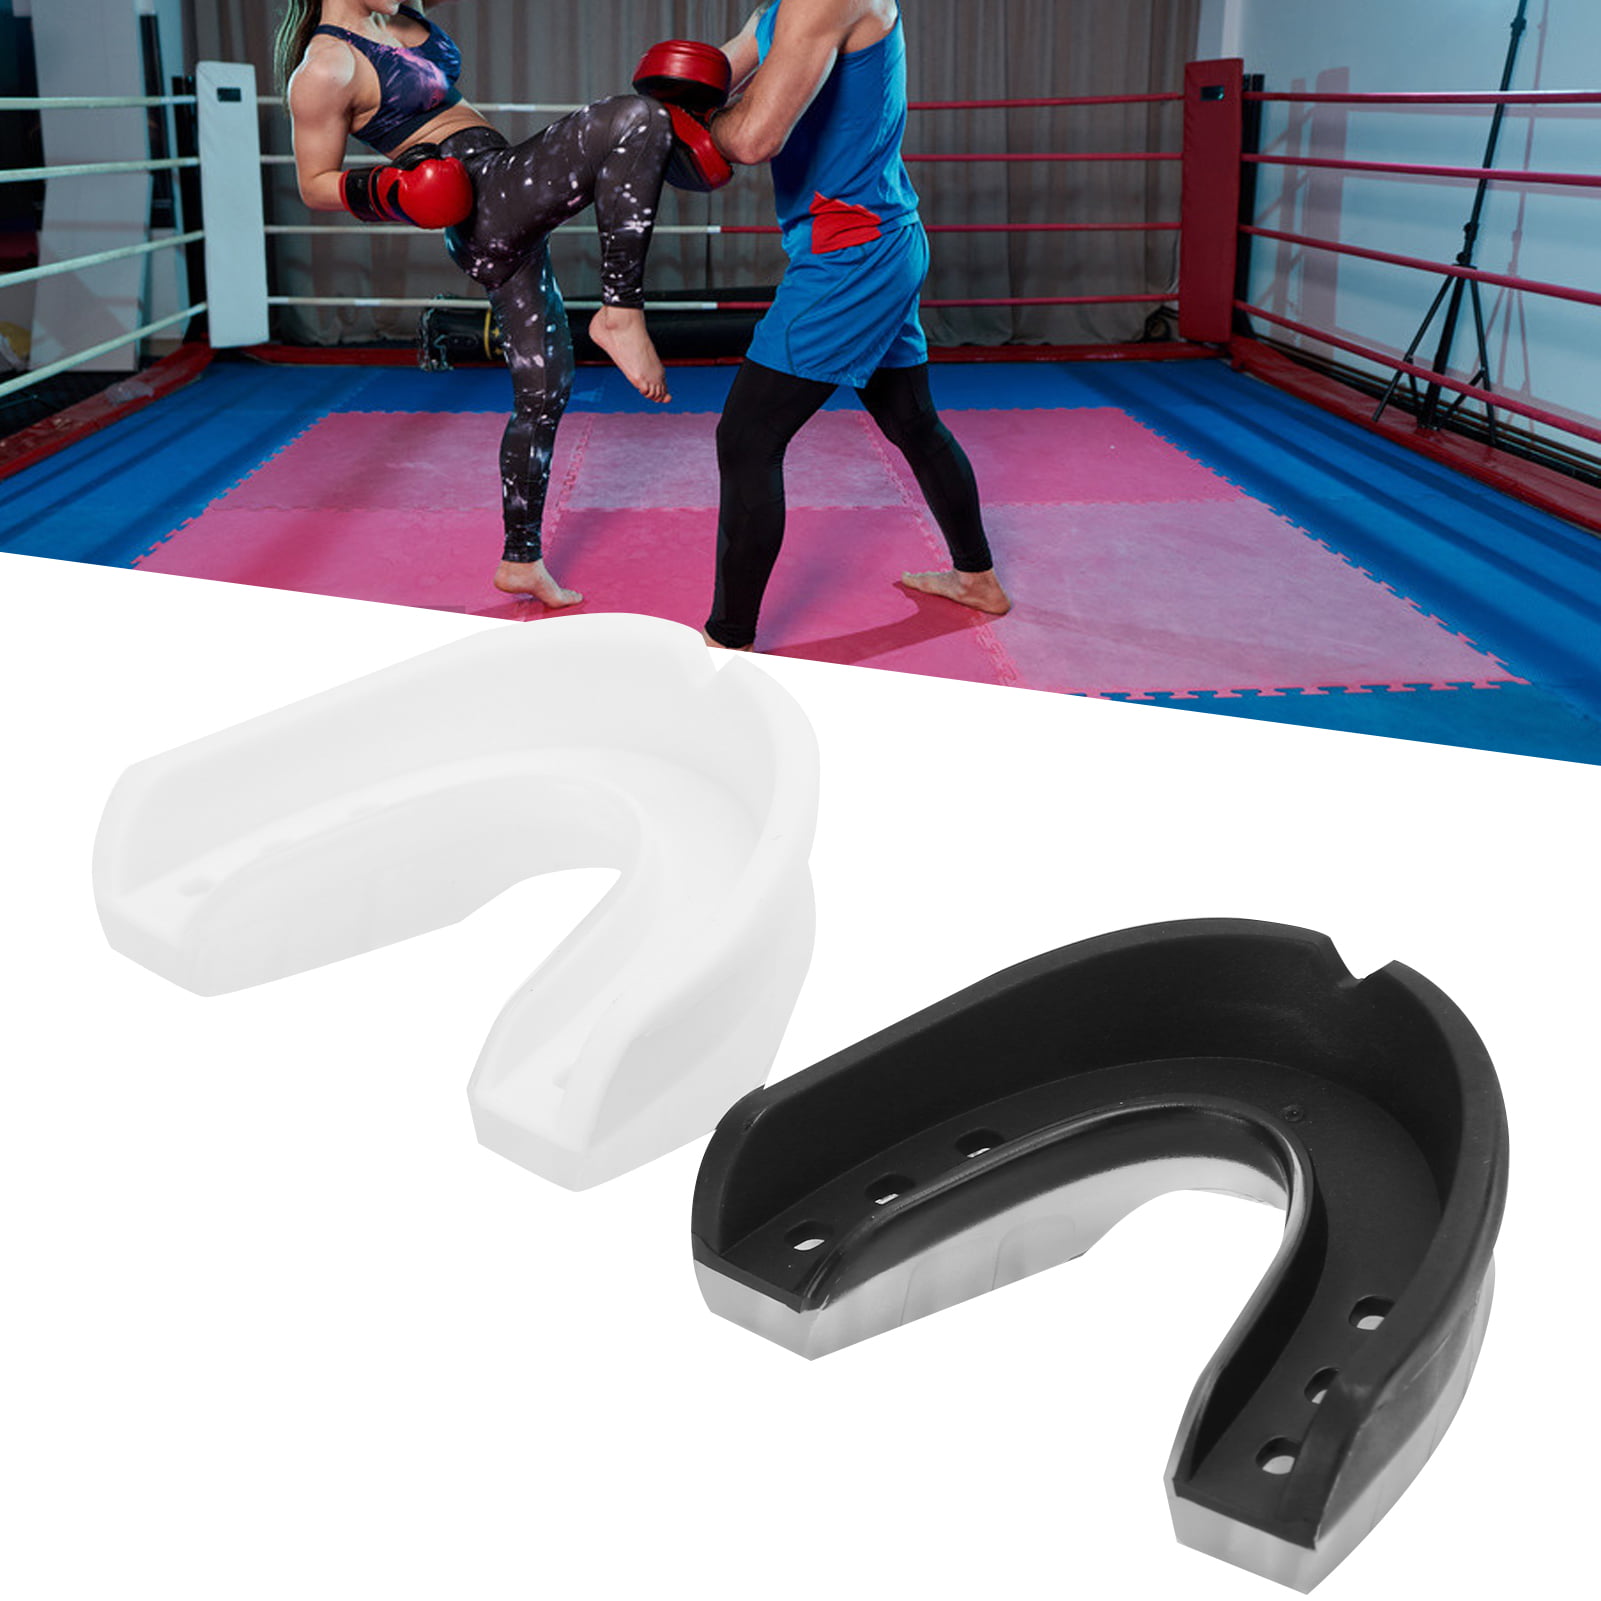 BRAND NEW AIR GEL GUM MOUTH GUARD SHIELD AIR MMA BOXING FIGHT GUARD PROTECTION 